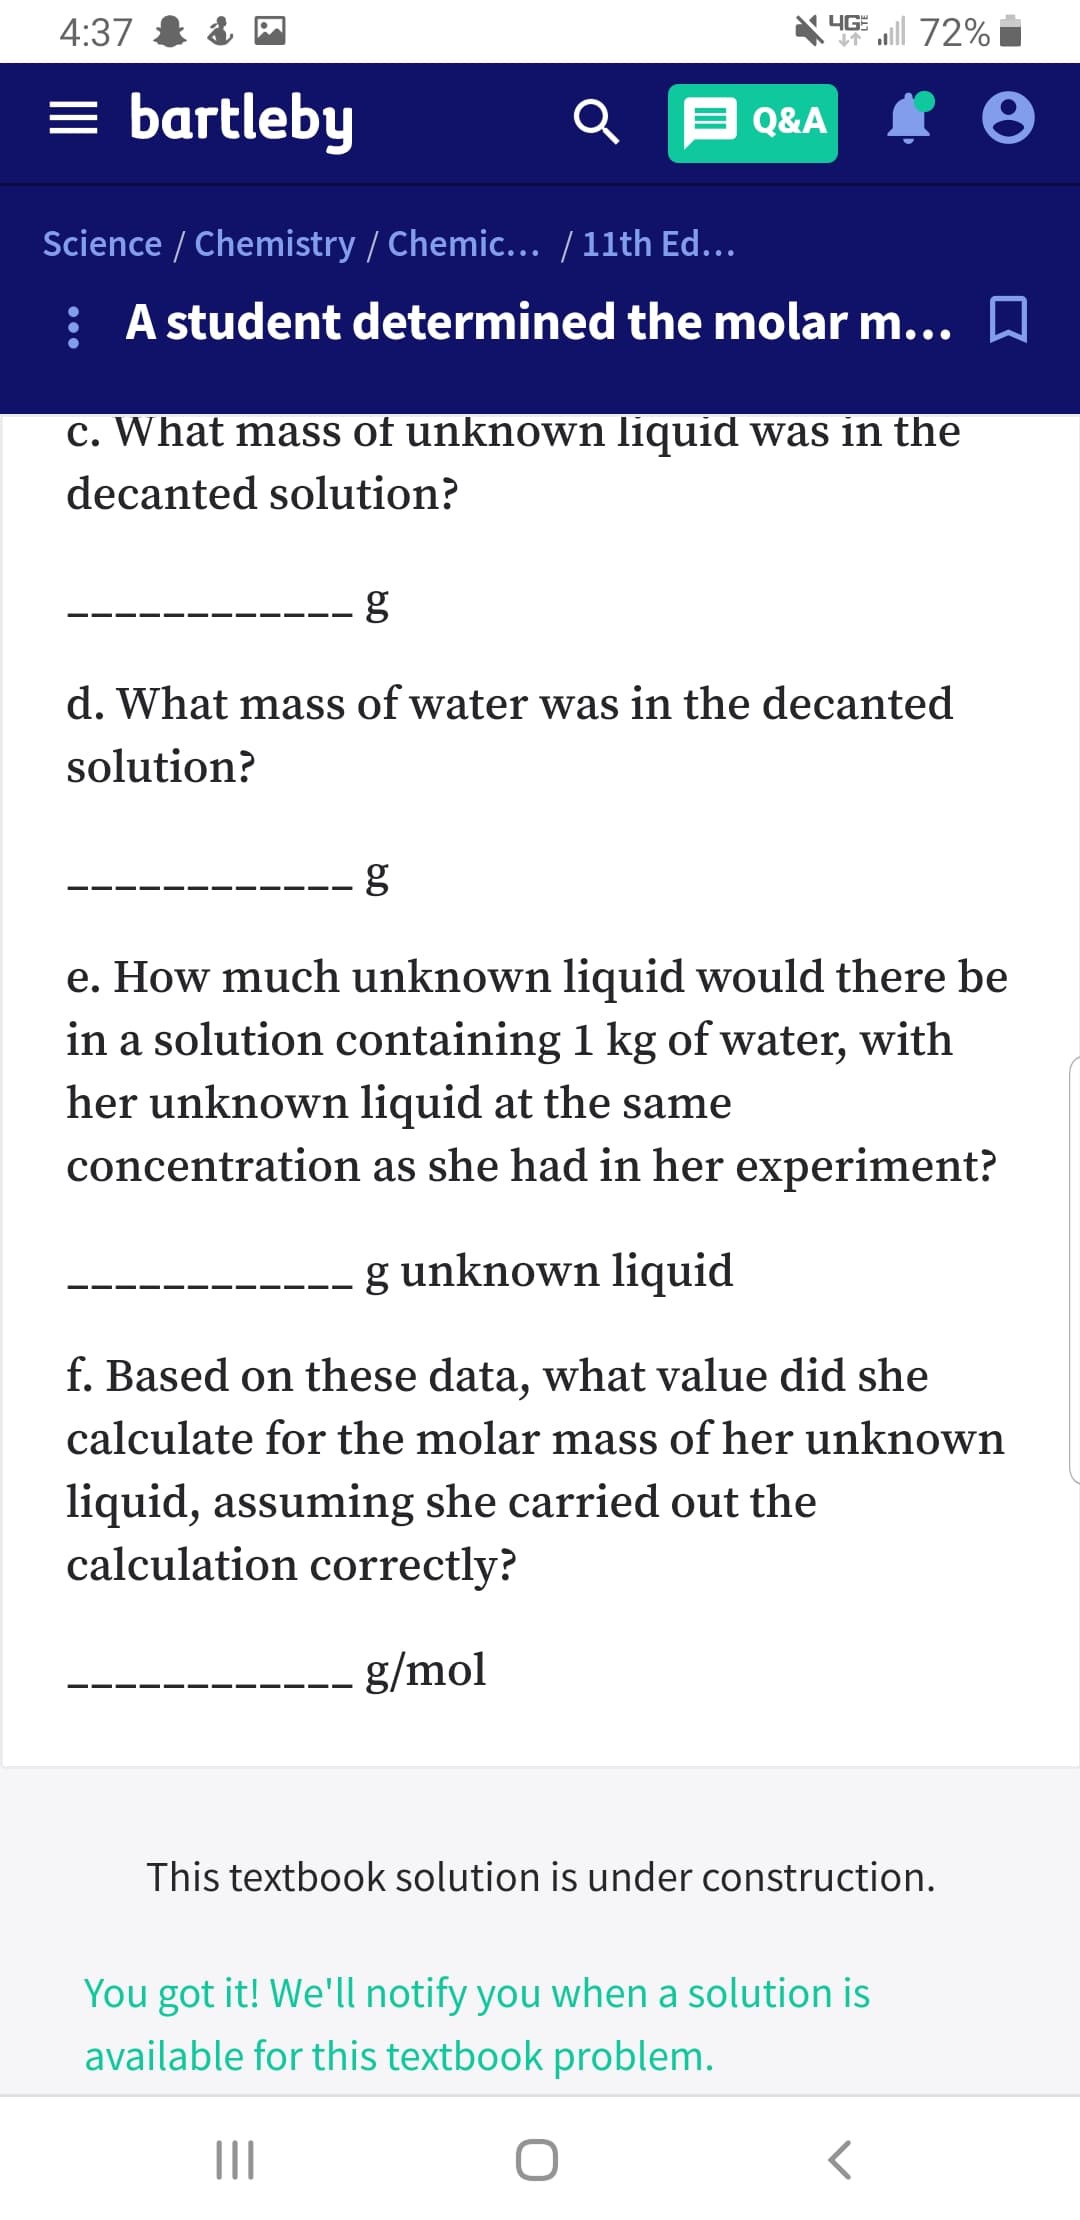 4G 72%
4:37
= bartleby
Q&A
Science / Chemistry / Chemic... / 11th Ed...
: A student determined the molar m... D
c. What mass of unknown liquid was in the
decanted solution?
d. What mass of water was in the decanted
solution?
e. How much unknown liquid would there be
in a solution containing 1 kg of water, with
her unknown liquid at the same
concentration as she had in her experiment?
g unknown liquid
f. Based on these data, what value did she
calculate for the molar mass of her unknown
liquid, assuming she carried out the
calculation correctly?
g/mol
This textbook solution is under construction.
You got it! We'll notify you when a solution is
available for this textbook problem.
II
